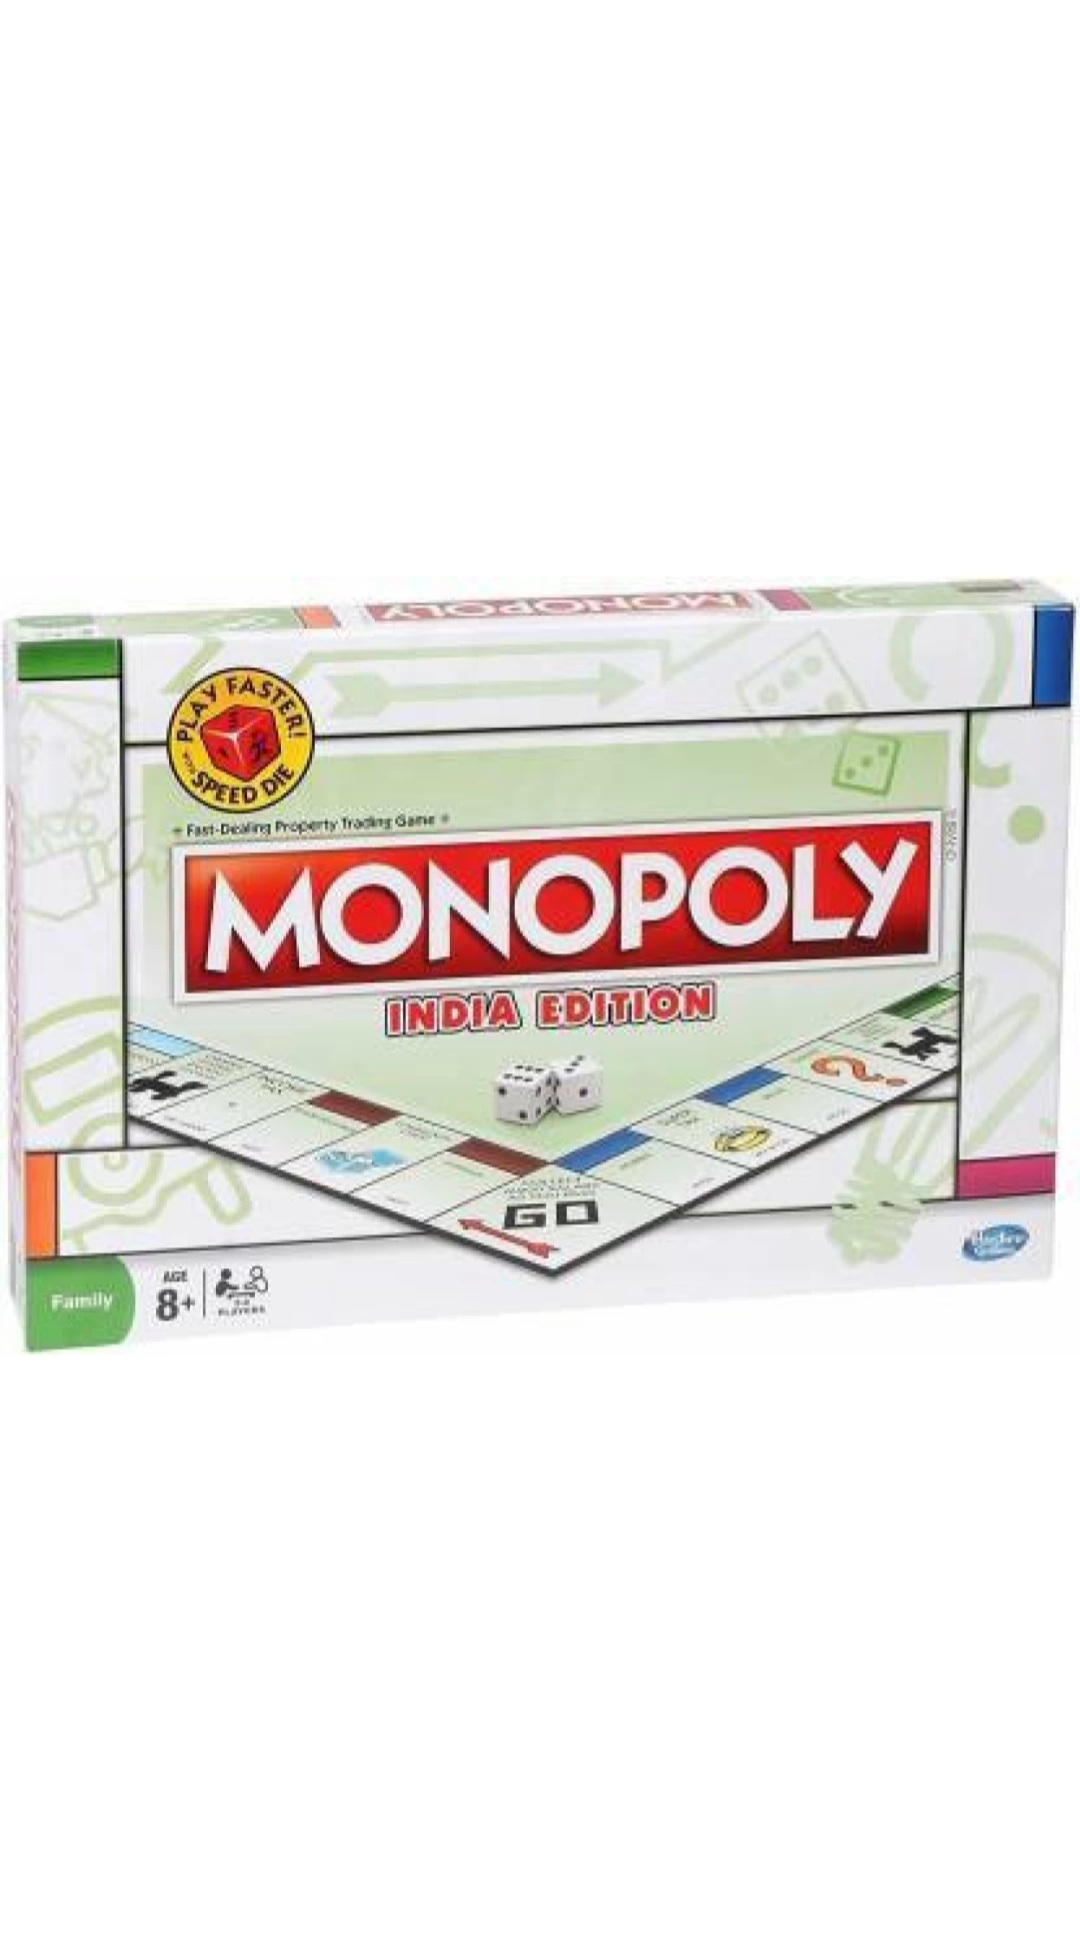 Monopoly indian edition family board game